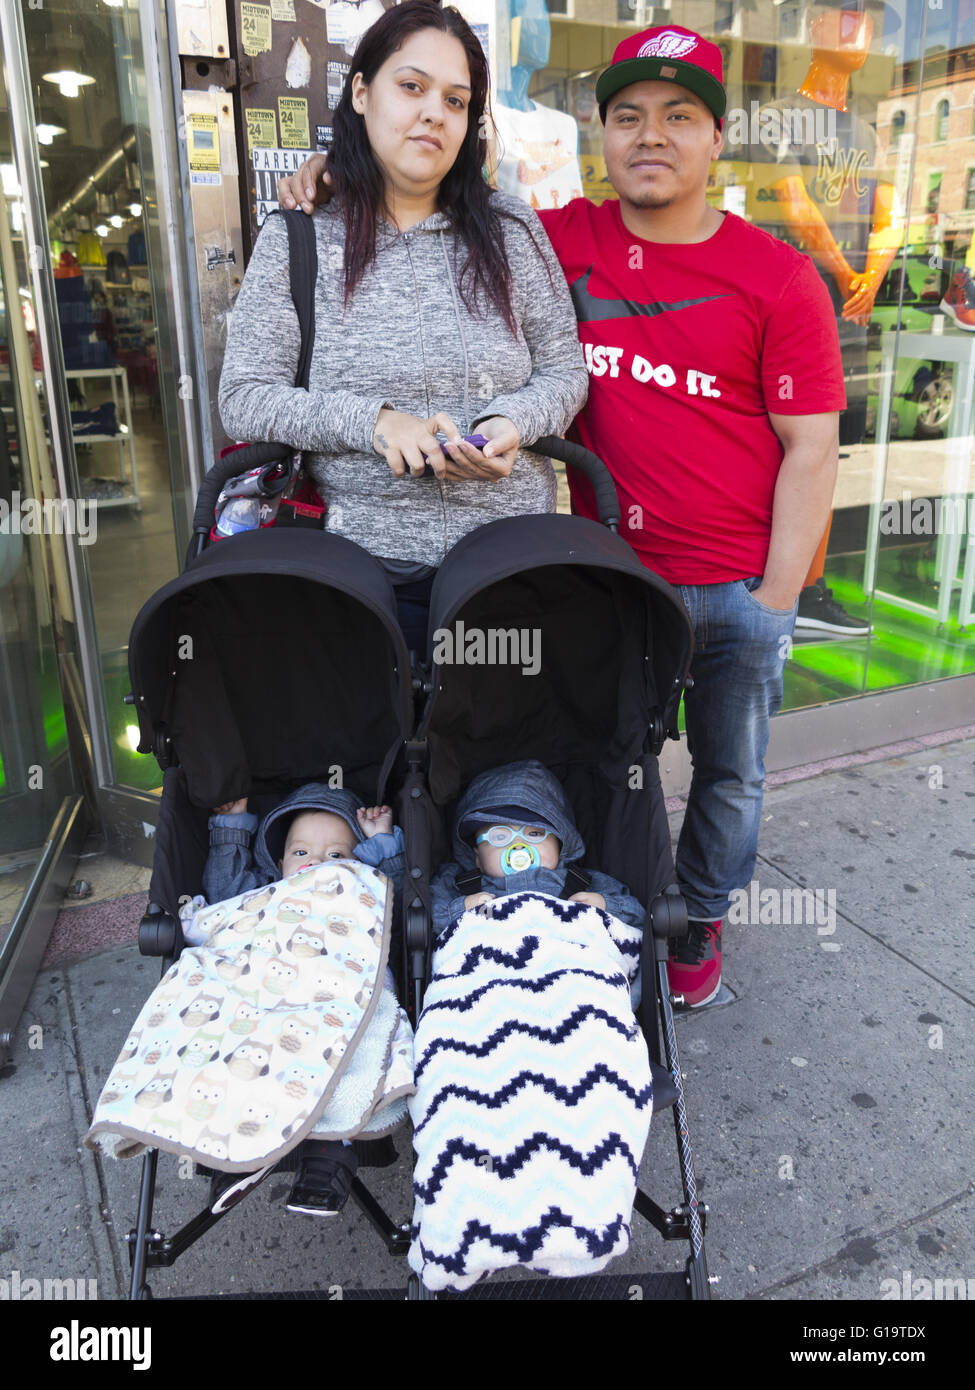 Guatemalan family on Mother's Day in the largely, Hispanic, Sunset Park neighborhood of Brooklyn, NY, May 8, 2016. Stock Photo